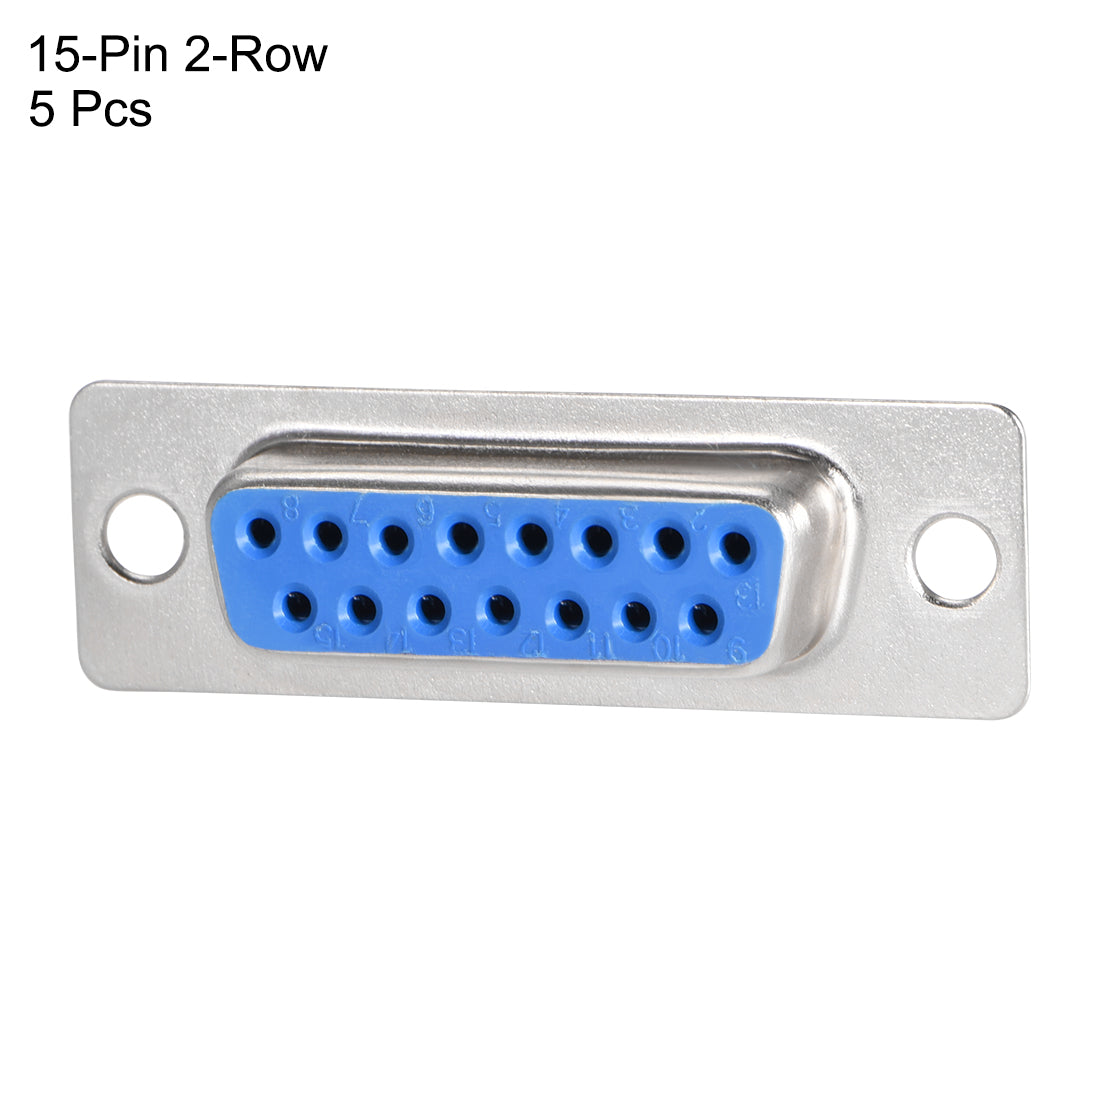 uxcell Uxcell D-sub Connector DB15 Female Socket 15-pin 2-row Port Terminal Breakout for Mechanical Equipment CNC Computers Blue 5pcs